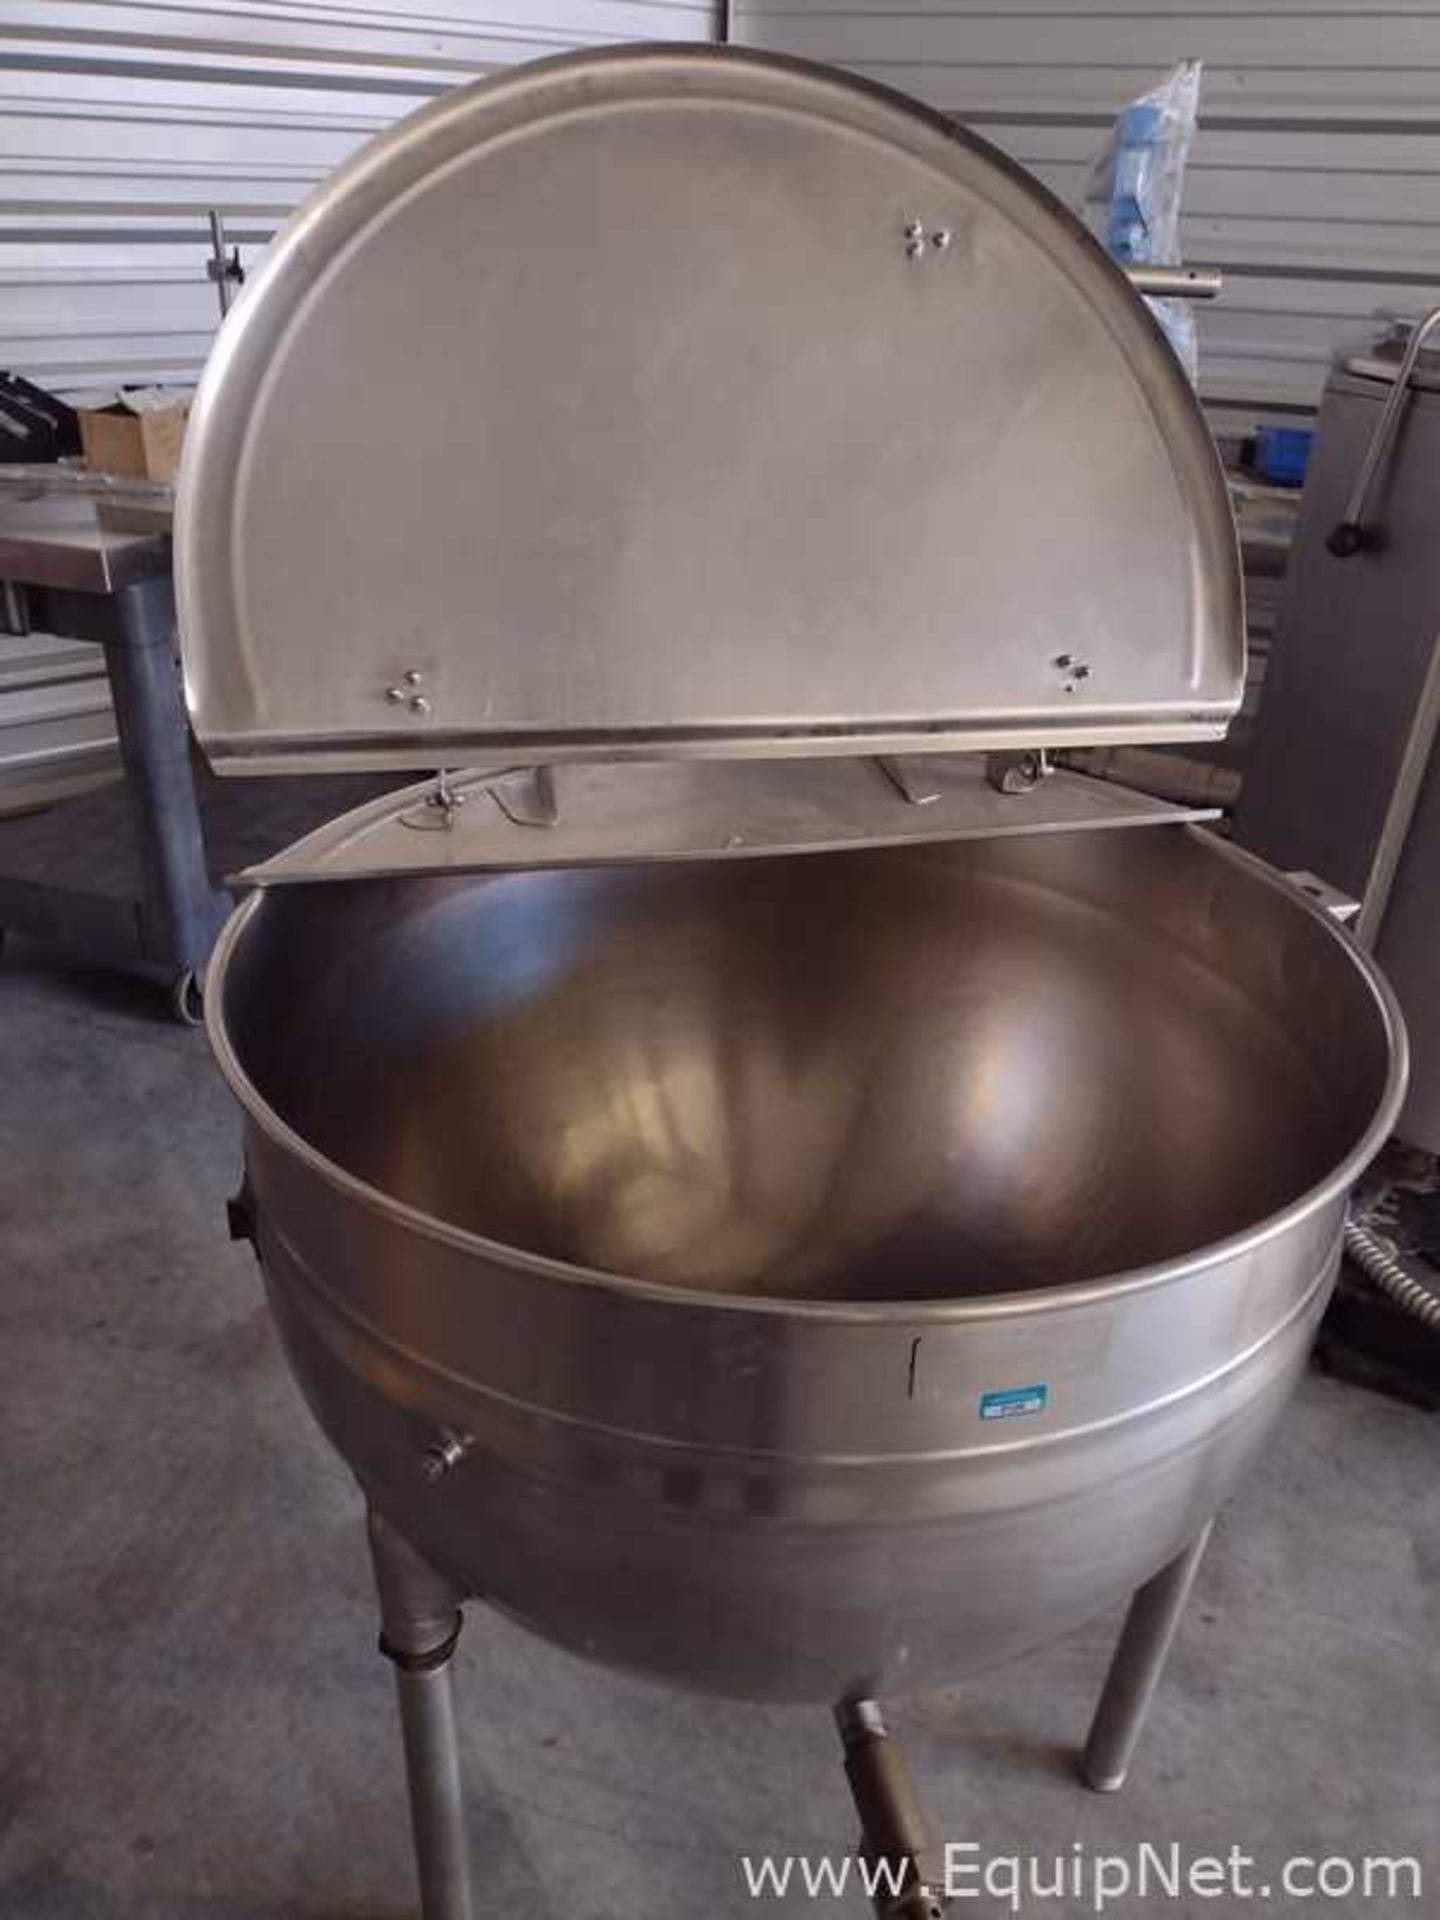 Legions Utensils 60 Gallon Stainless Steel Jacketed Kettle - Image 2 of 5